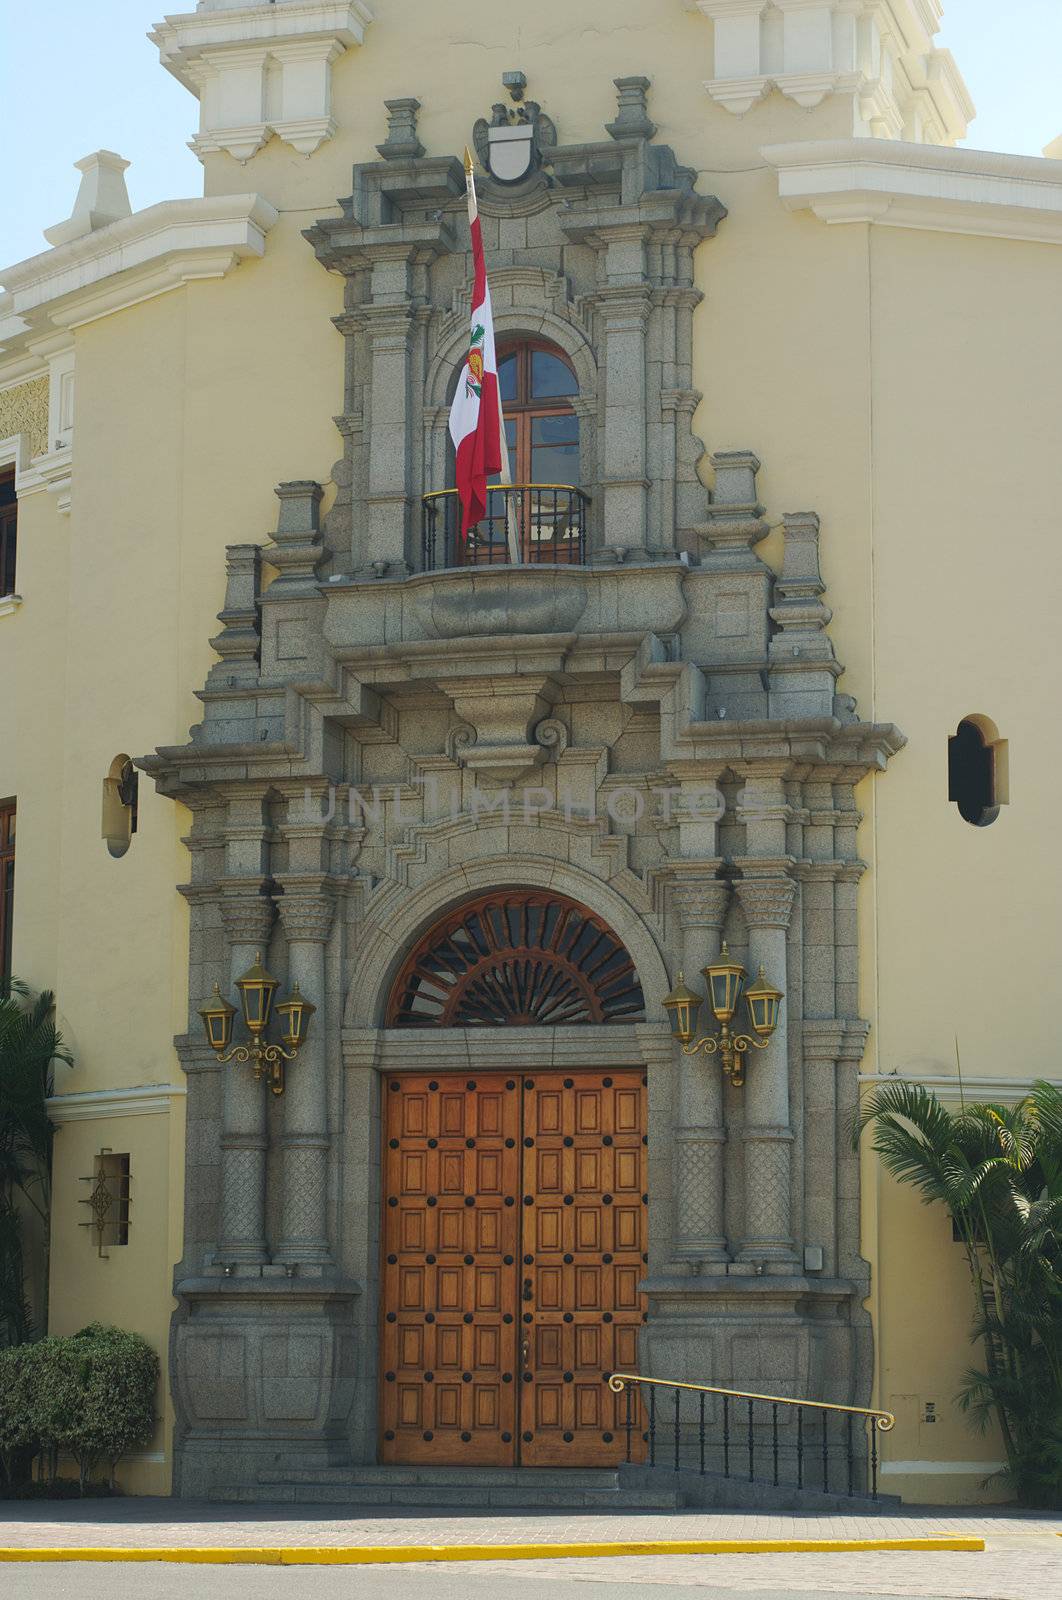 The entry of the Miraflores Town Hall in Lima, Peru with the Peruvian flag 